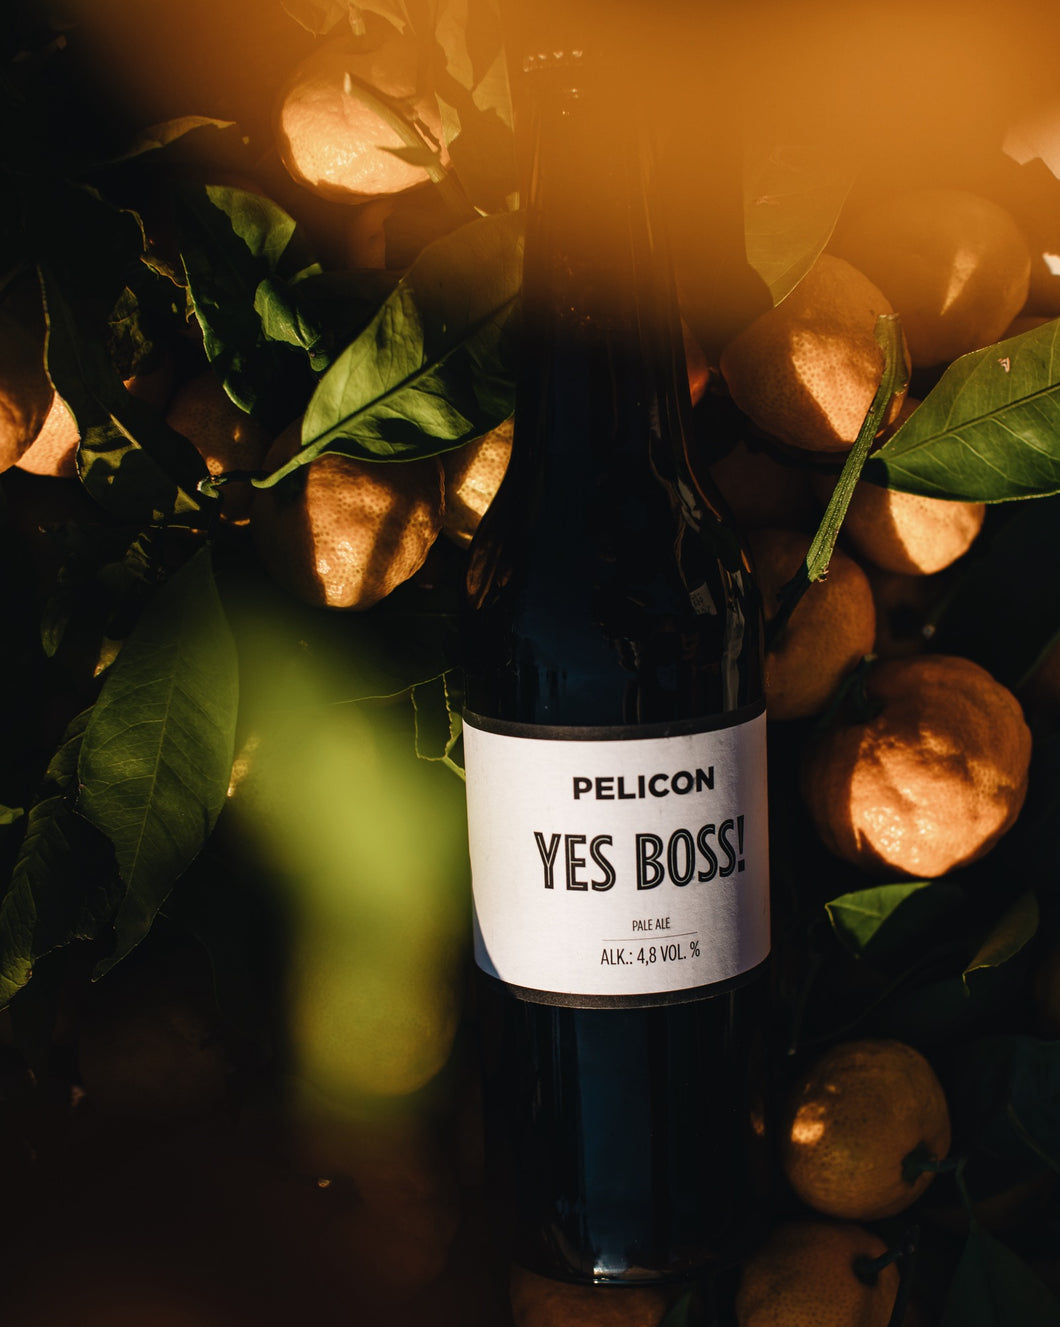 Yes Boss! (pale ale)